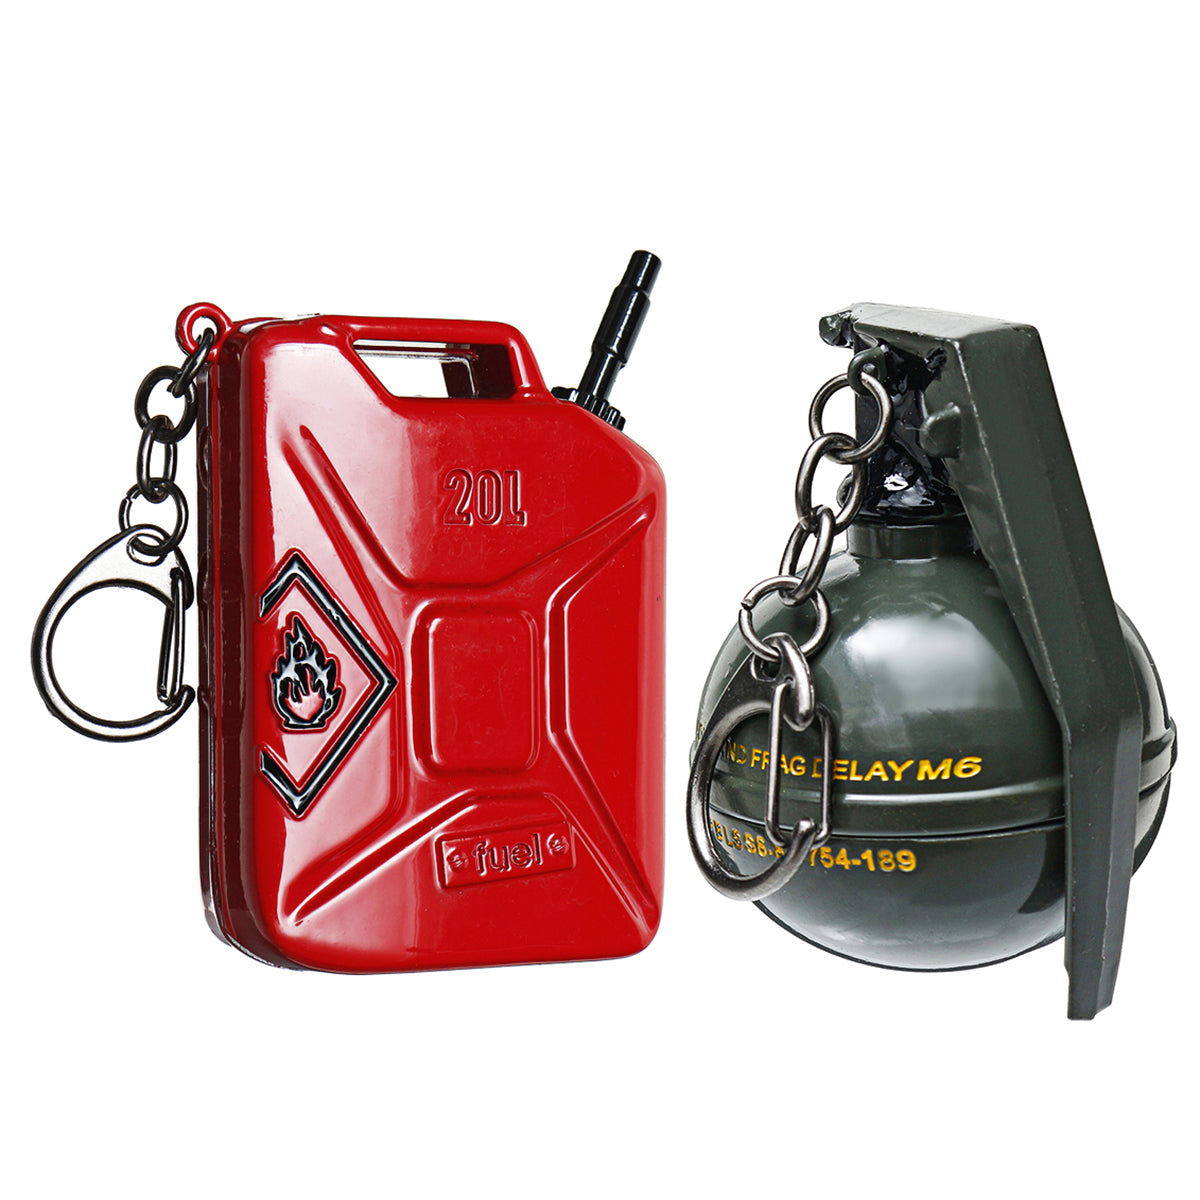 Firebrick Zinc Alloy Fuel Grenade Weapons Decorative Hanging Key Chains Keychain